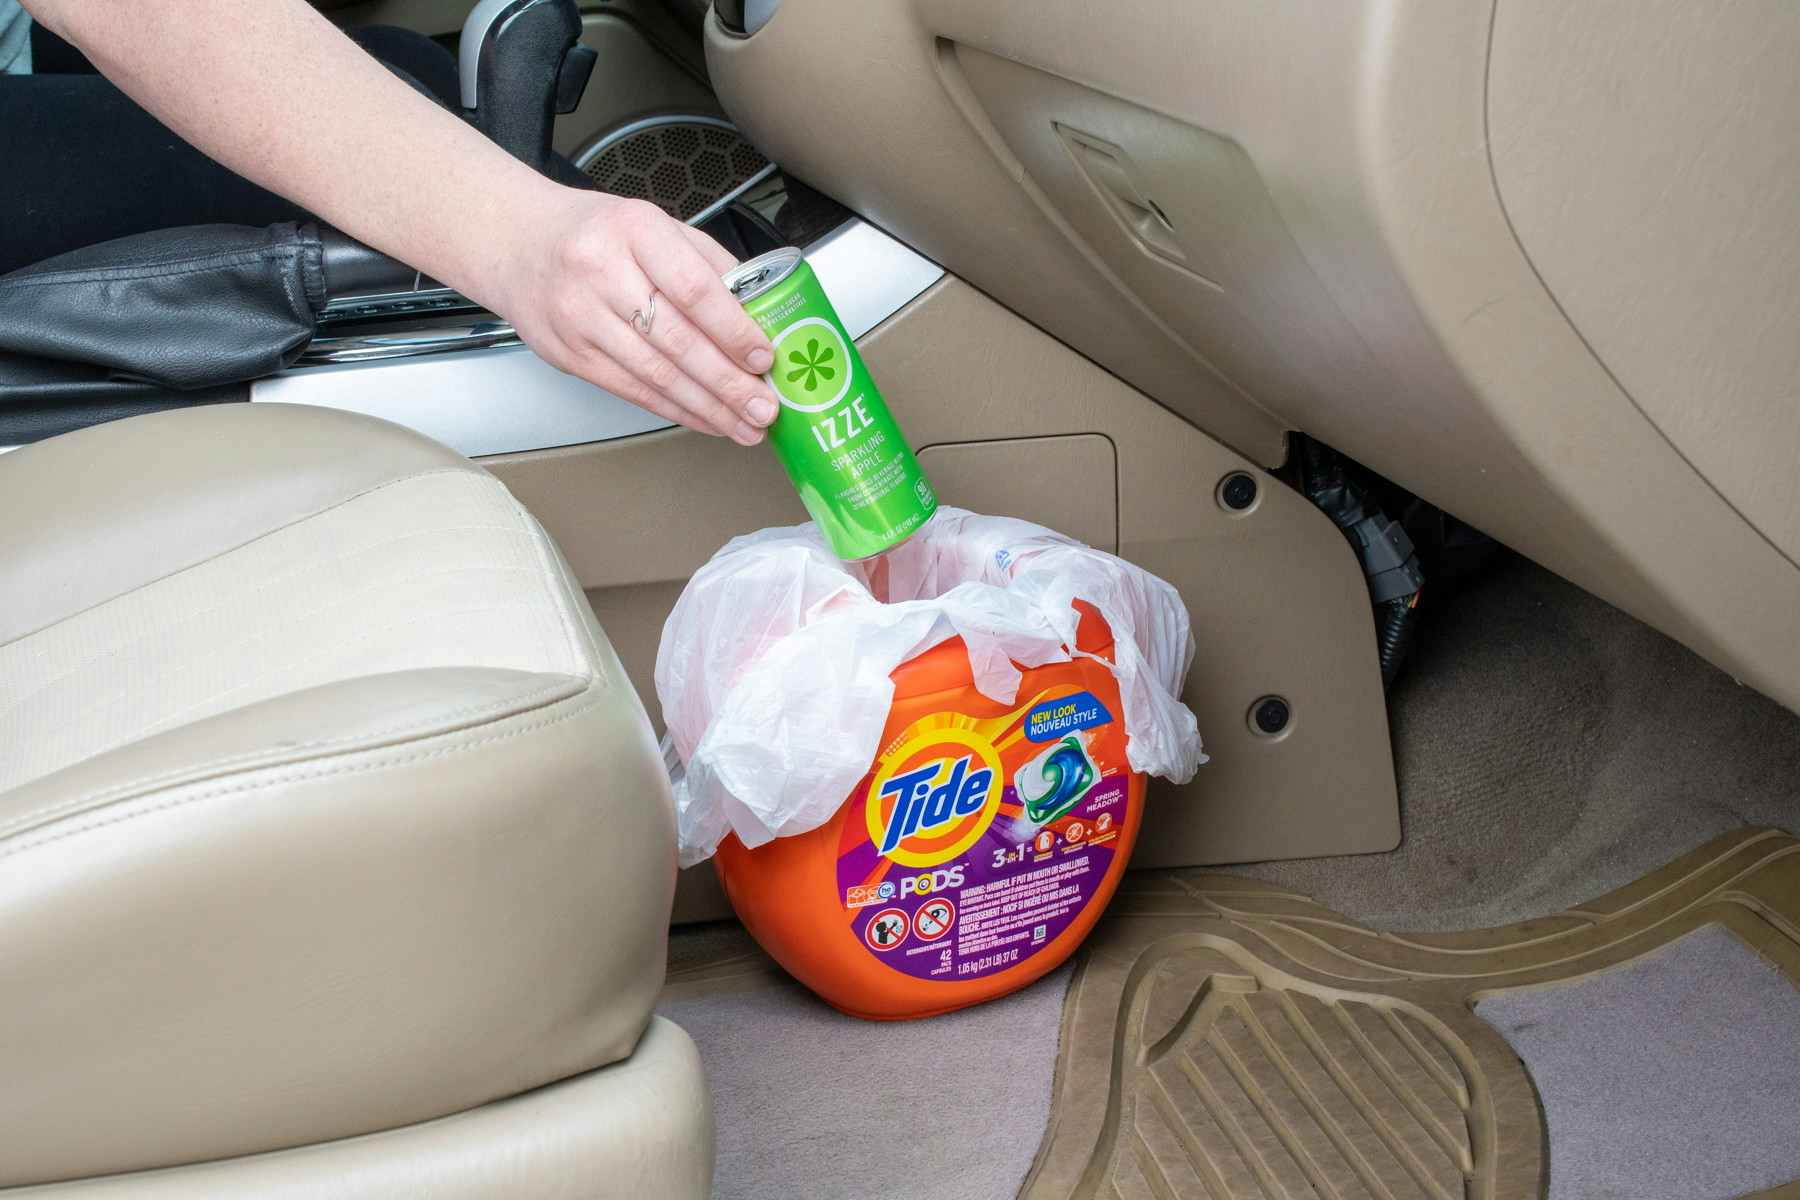 Reuse a laundry detergent bottle for a car trash can.